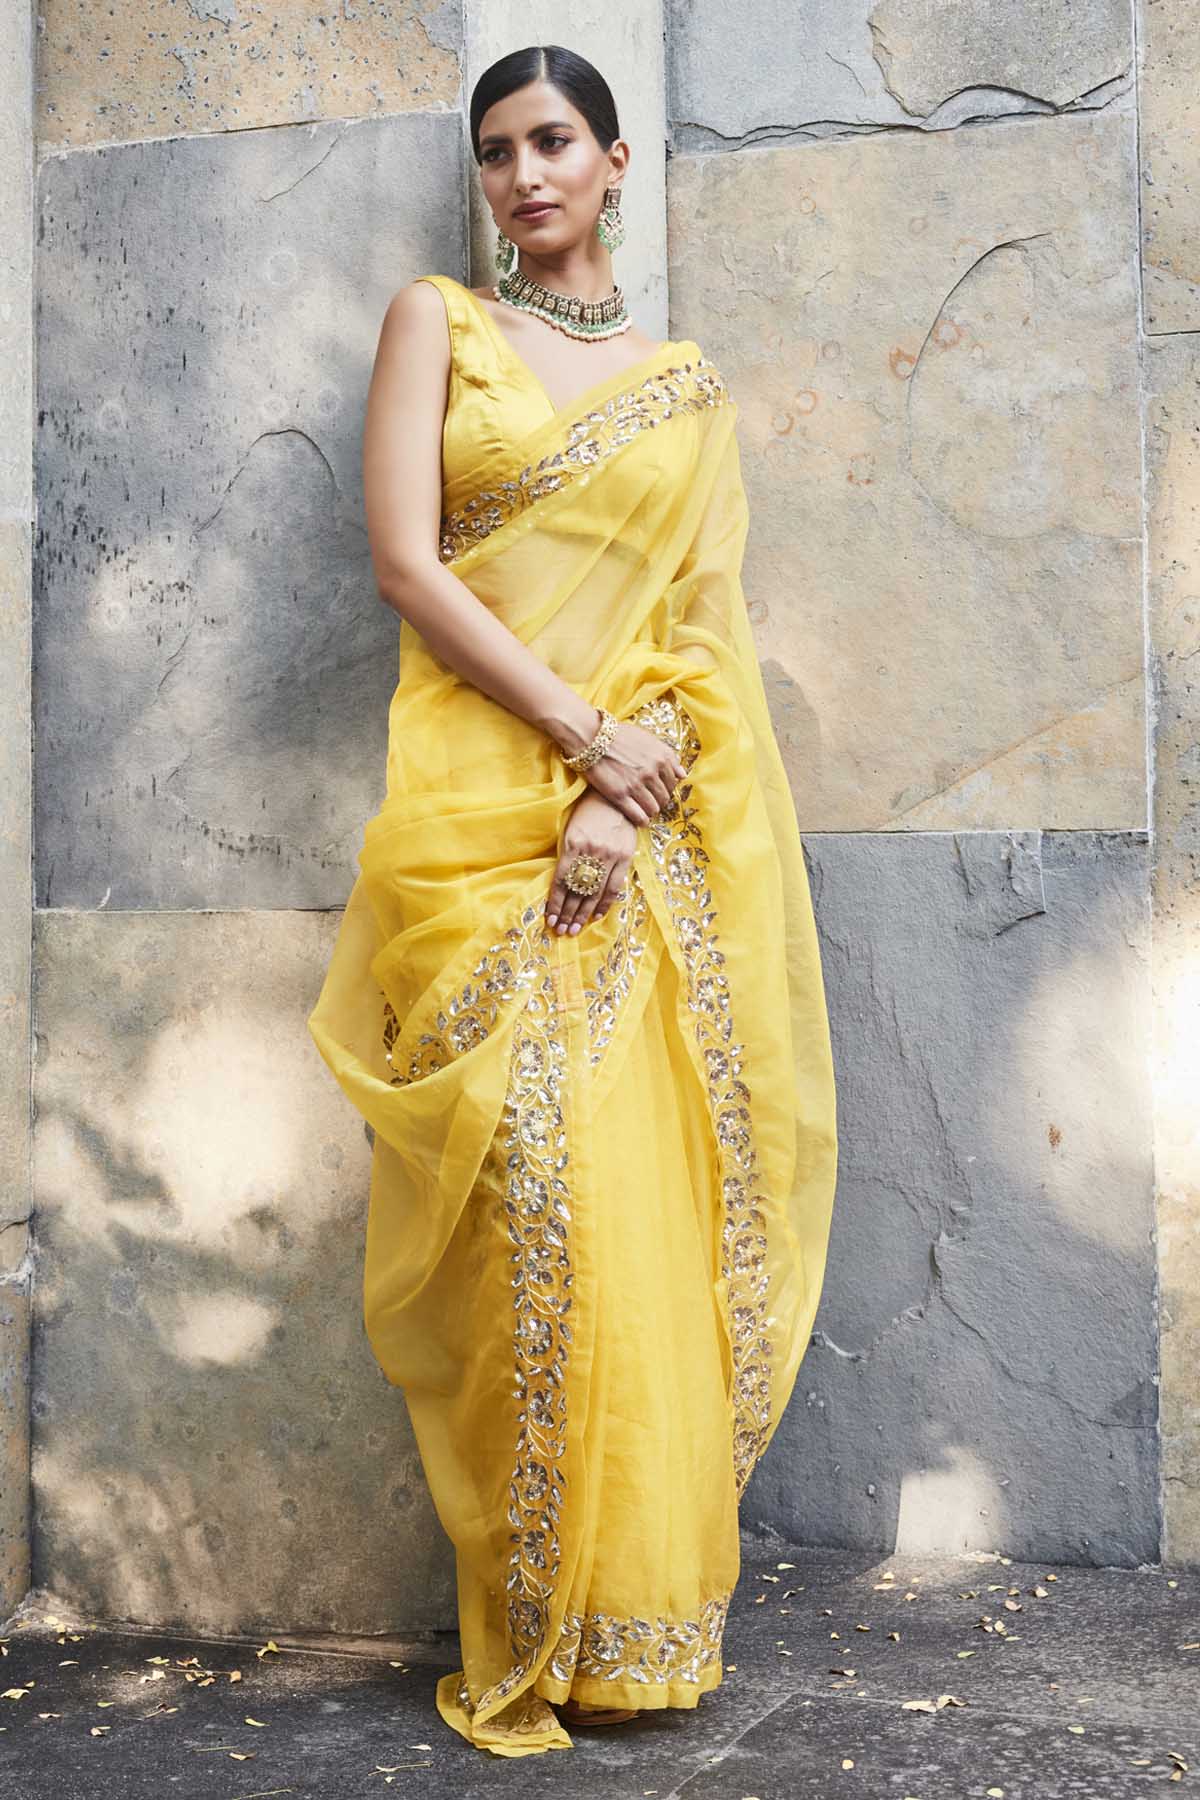 Designer Ranian Yellow silk organza saree with delicate floral pattern border in 3D sequins and zari. The saree comes with a plain satin silk blouse with a back hook For women Online at ScrollnShops